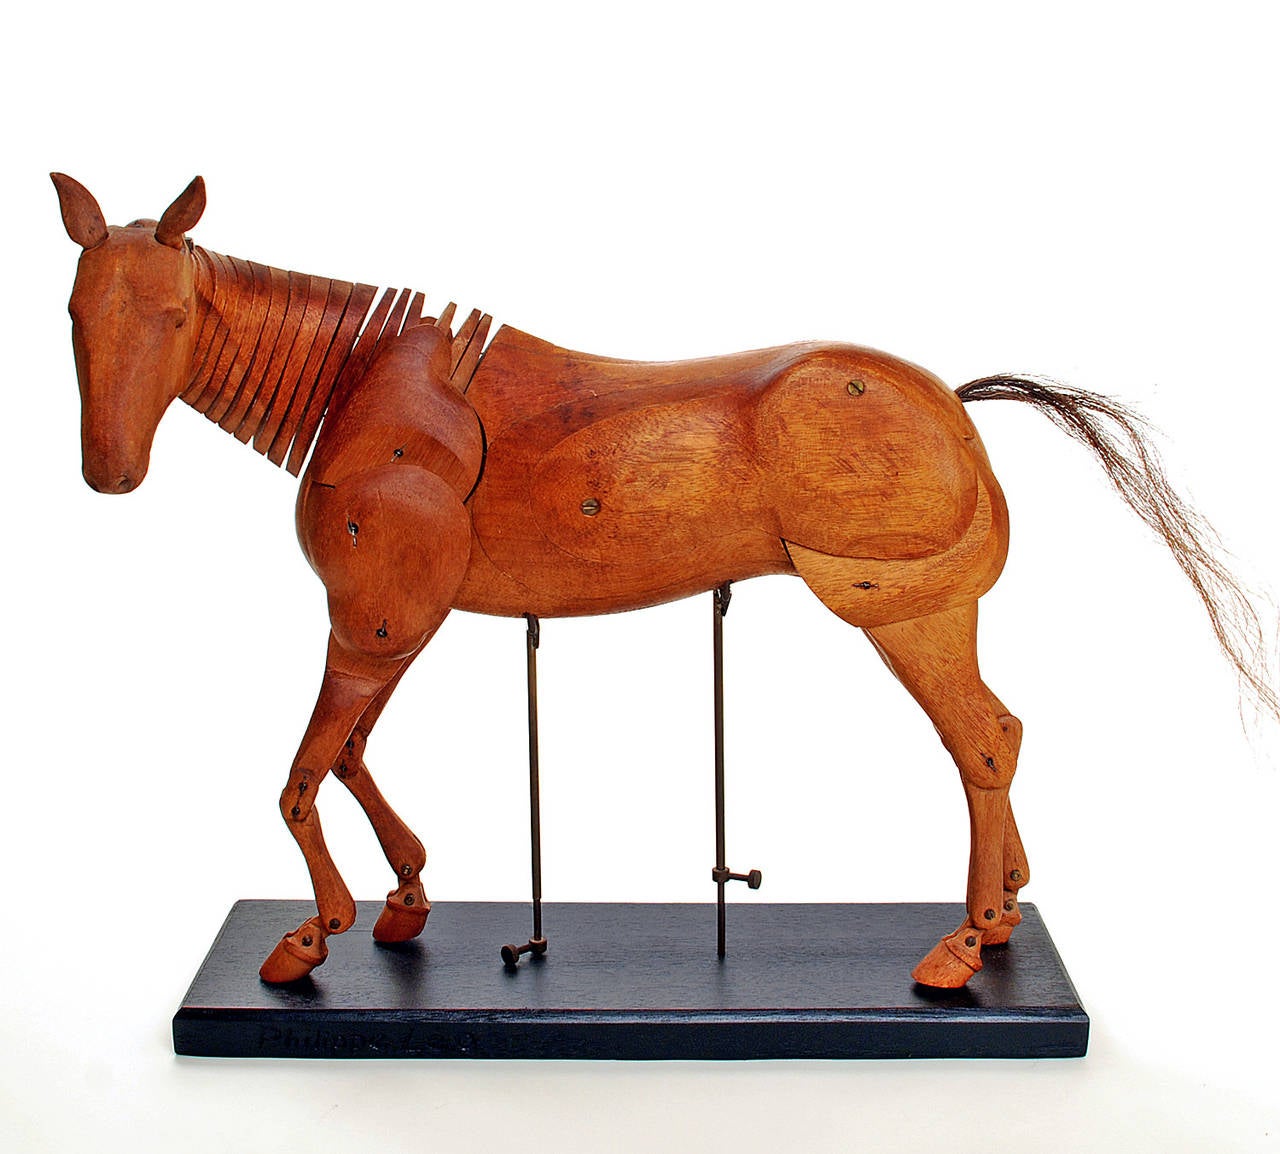 Fully Articulated Artist's Model of a Horse, Signed 3